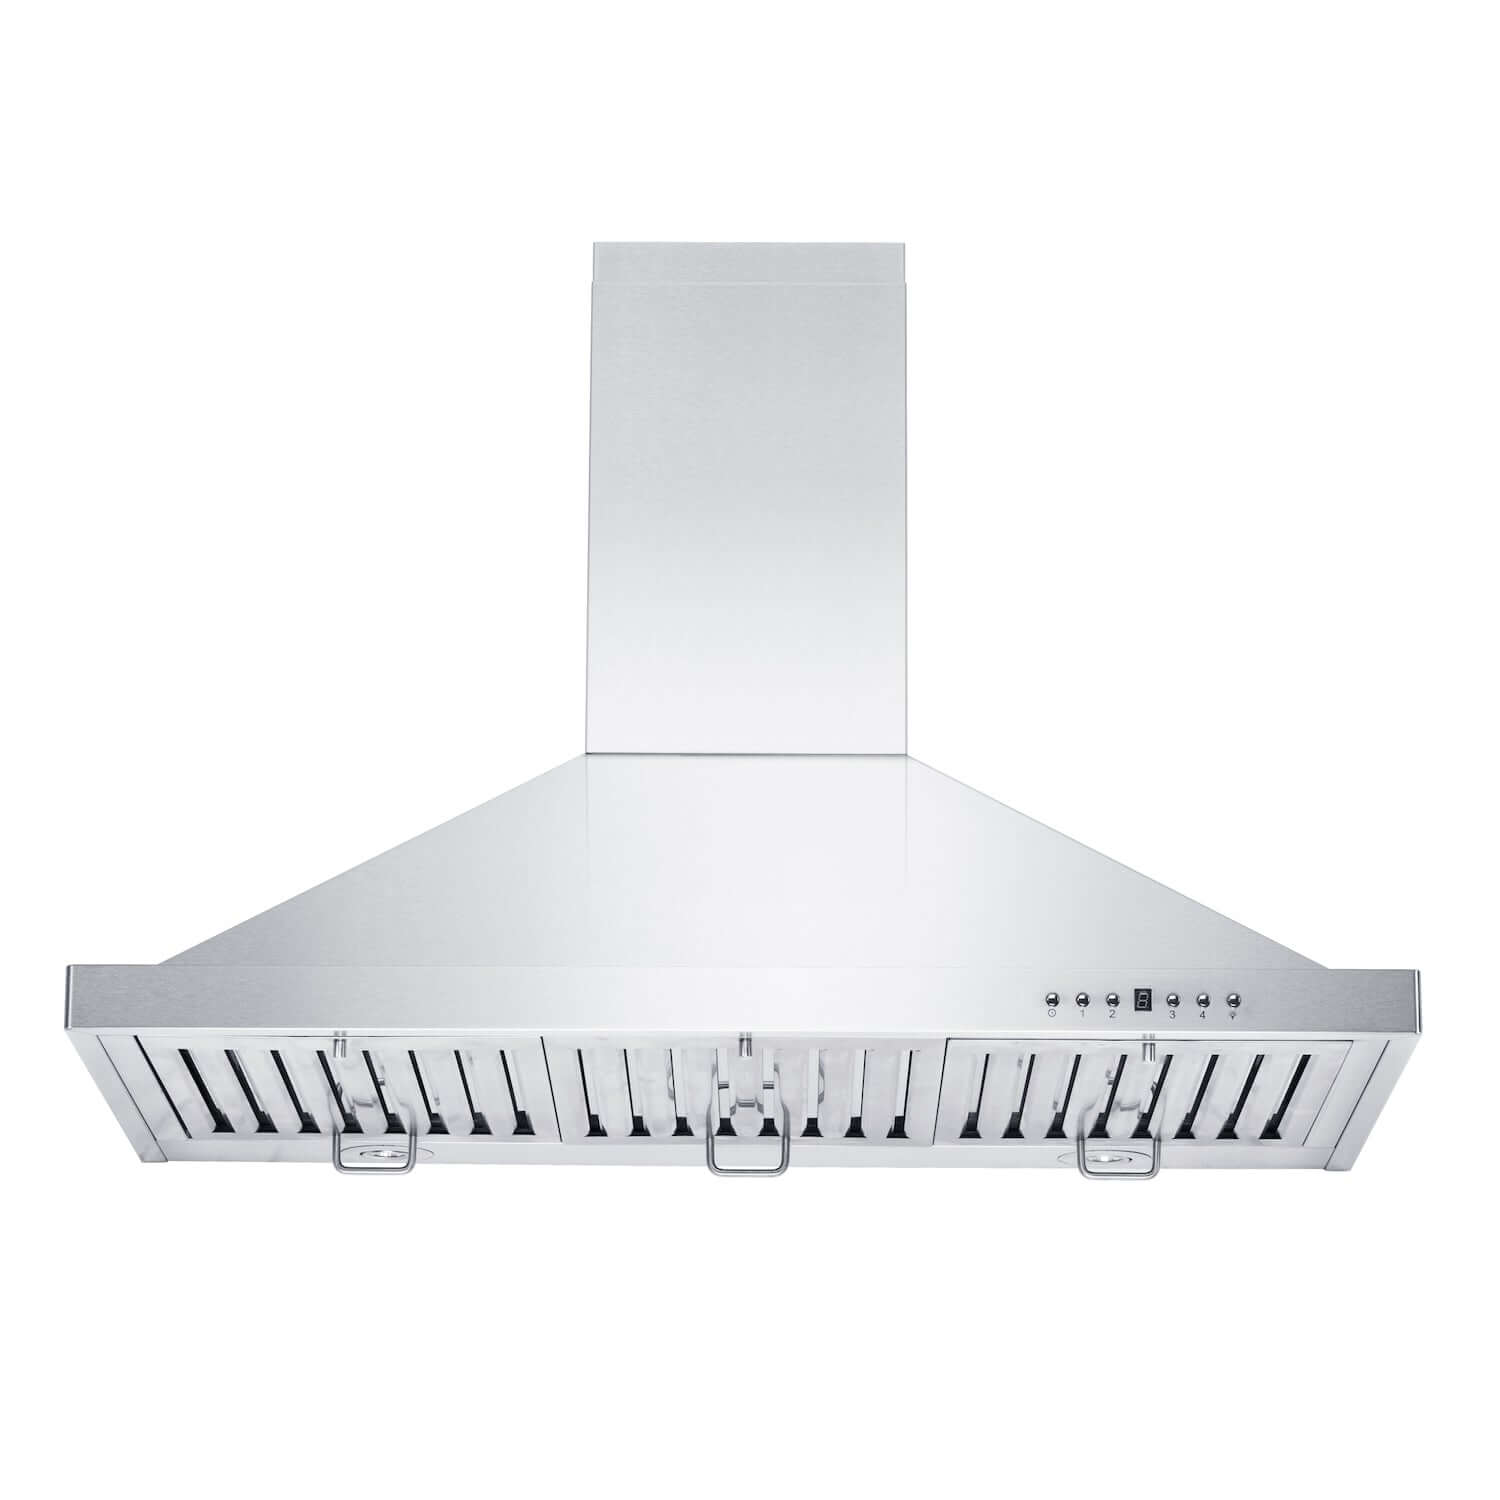 ZLINE Stainless Steel Convertible Vent Wall Mount Range Hood front-under angle.